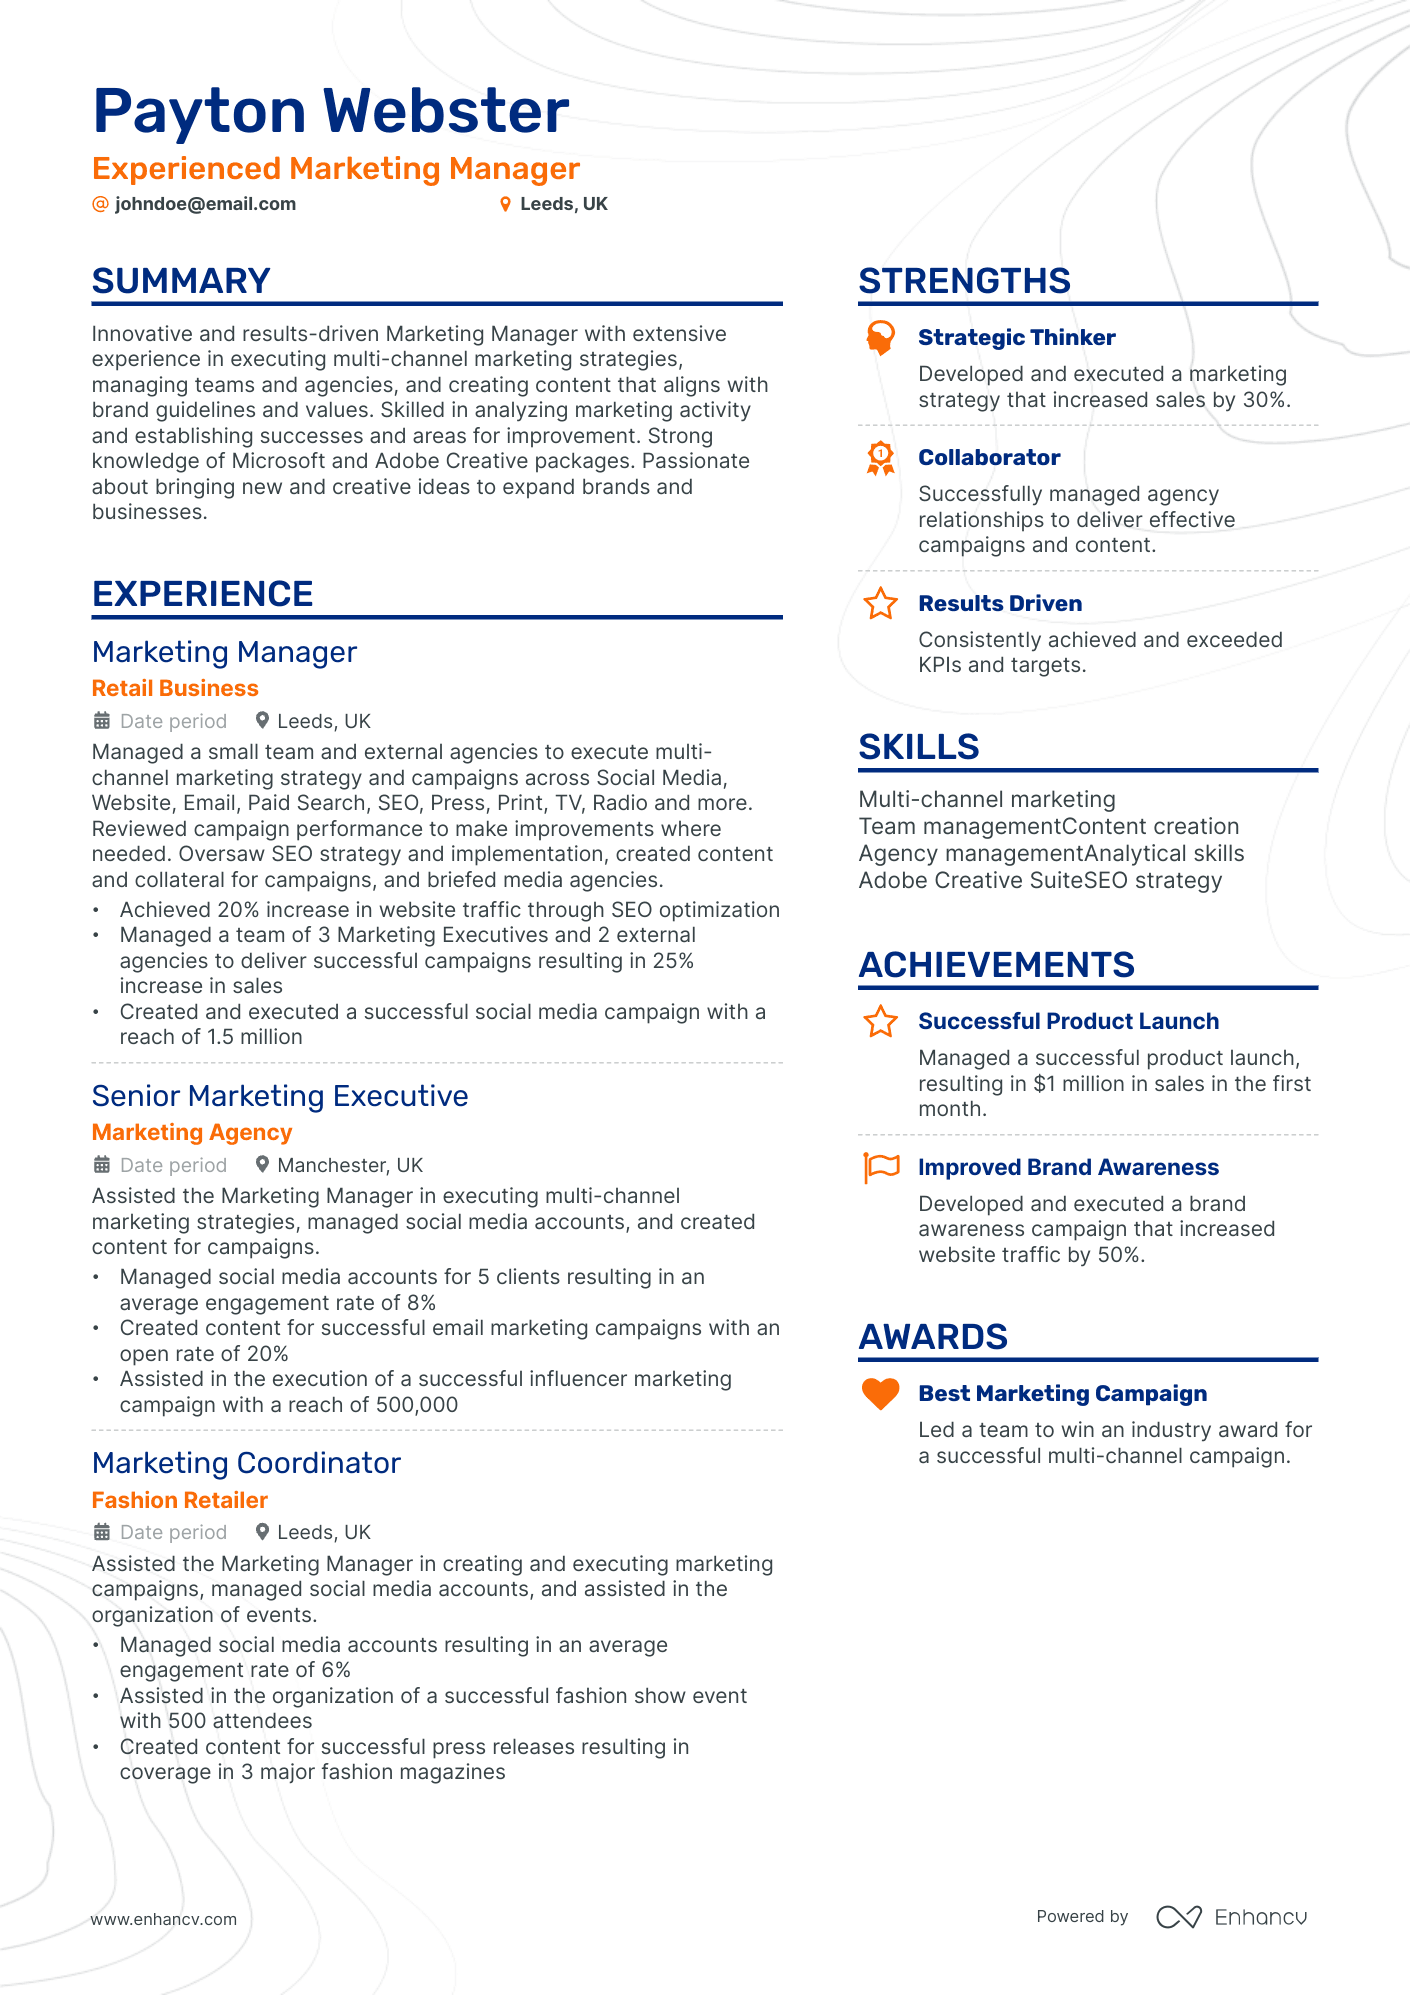 Channel Marketing Manager resume example